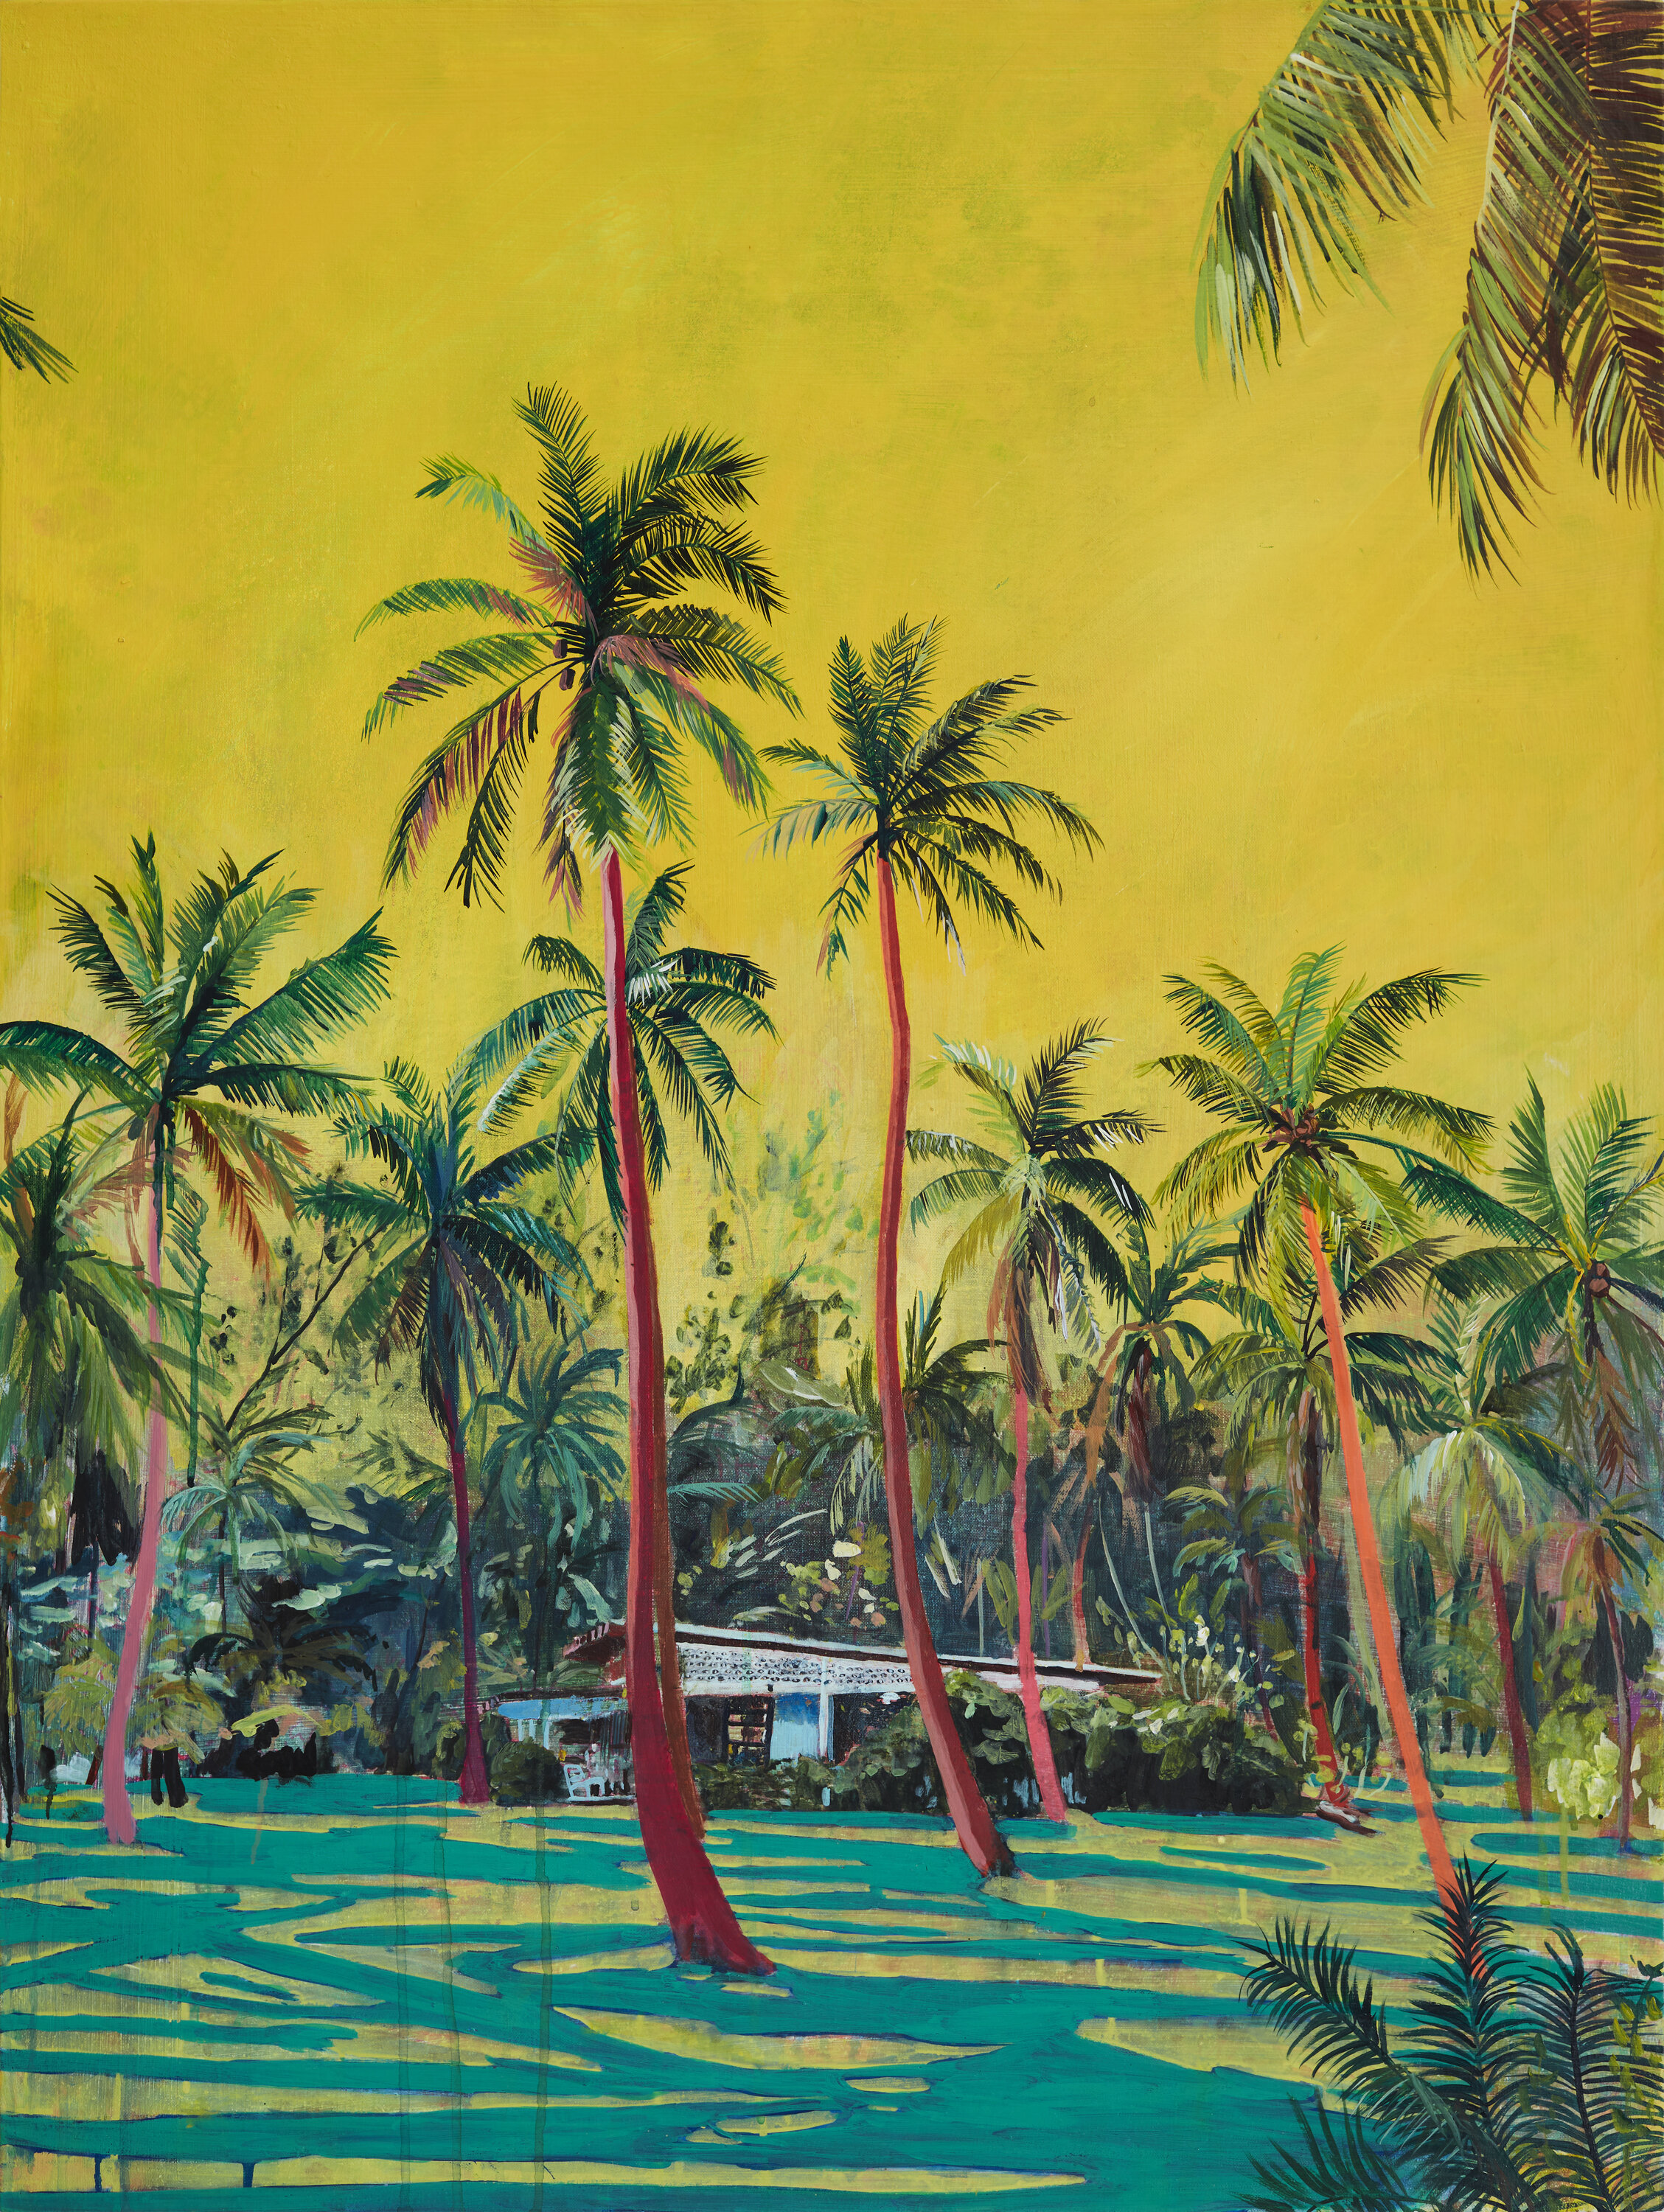 Coconut Plantation, 40x30 inches, acrylic on linen, sold